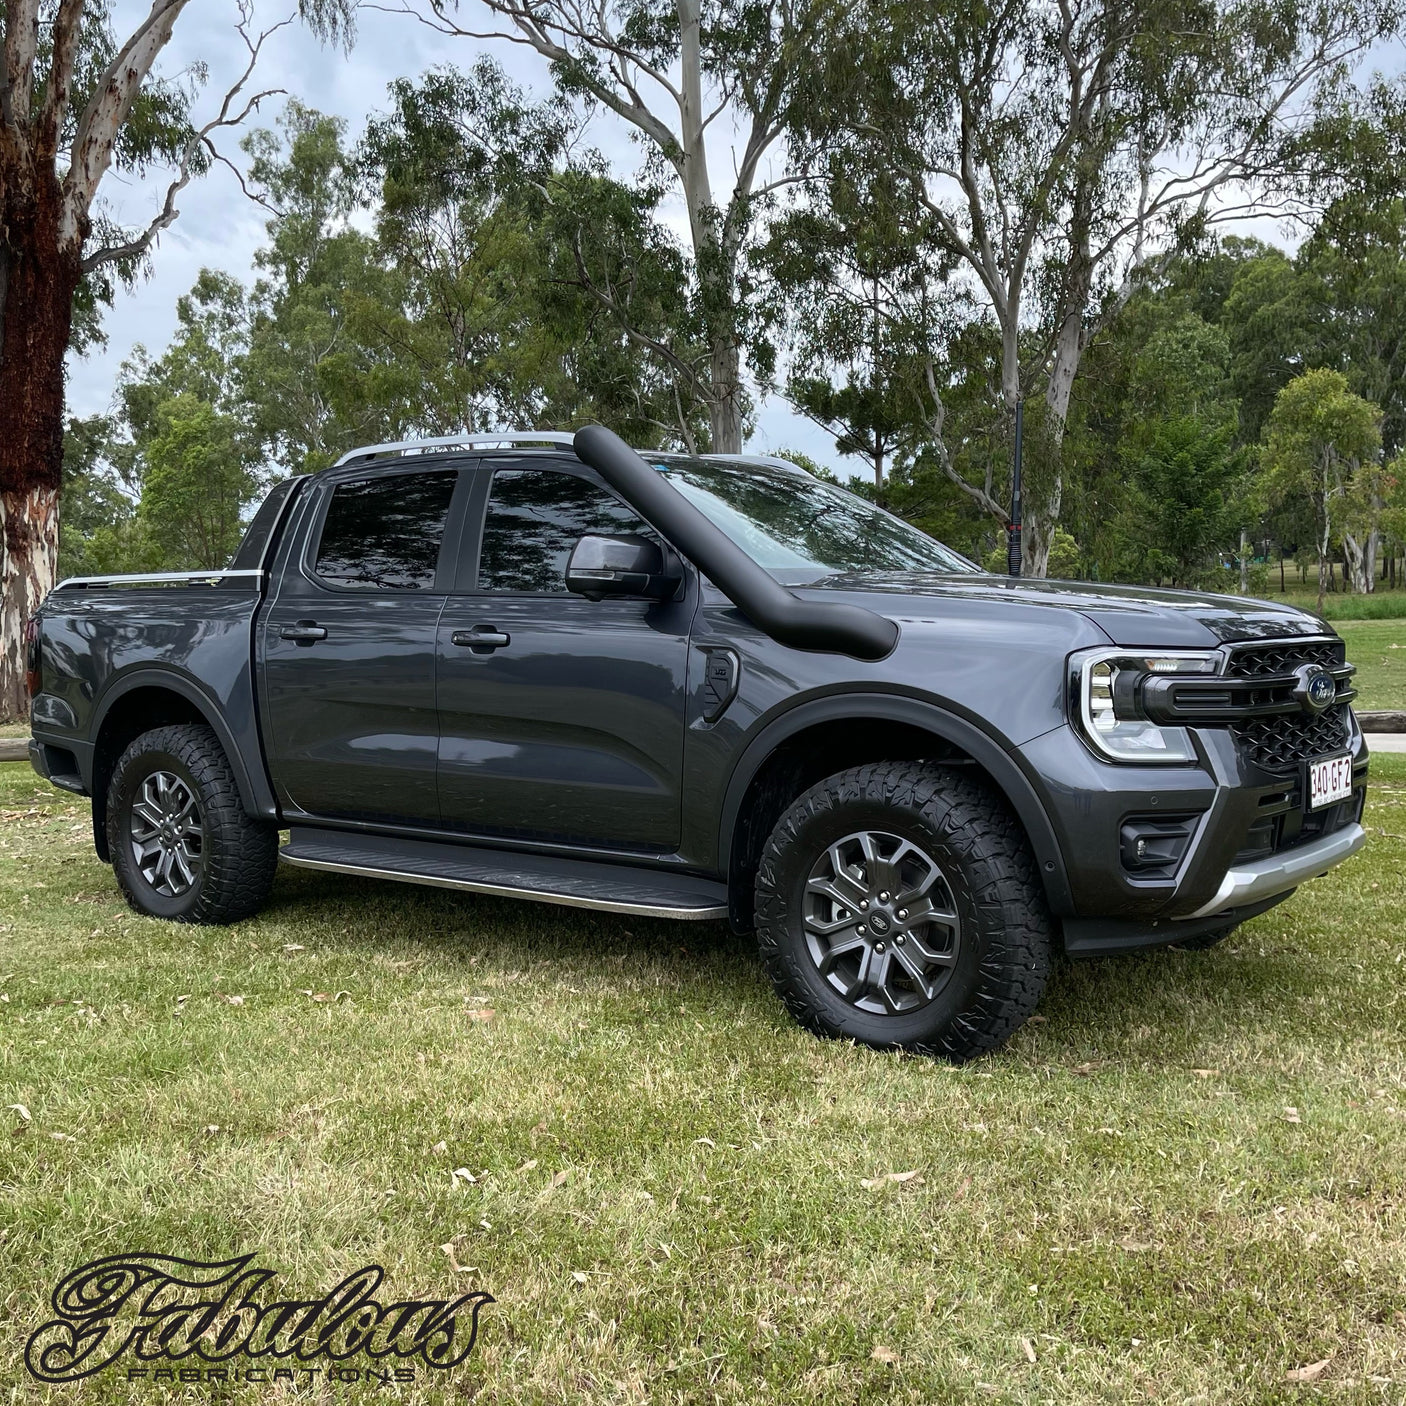 Ford Ranger Next Gen 5 inch Stainless Snorkel and Alloy Washer Bottle Kit